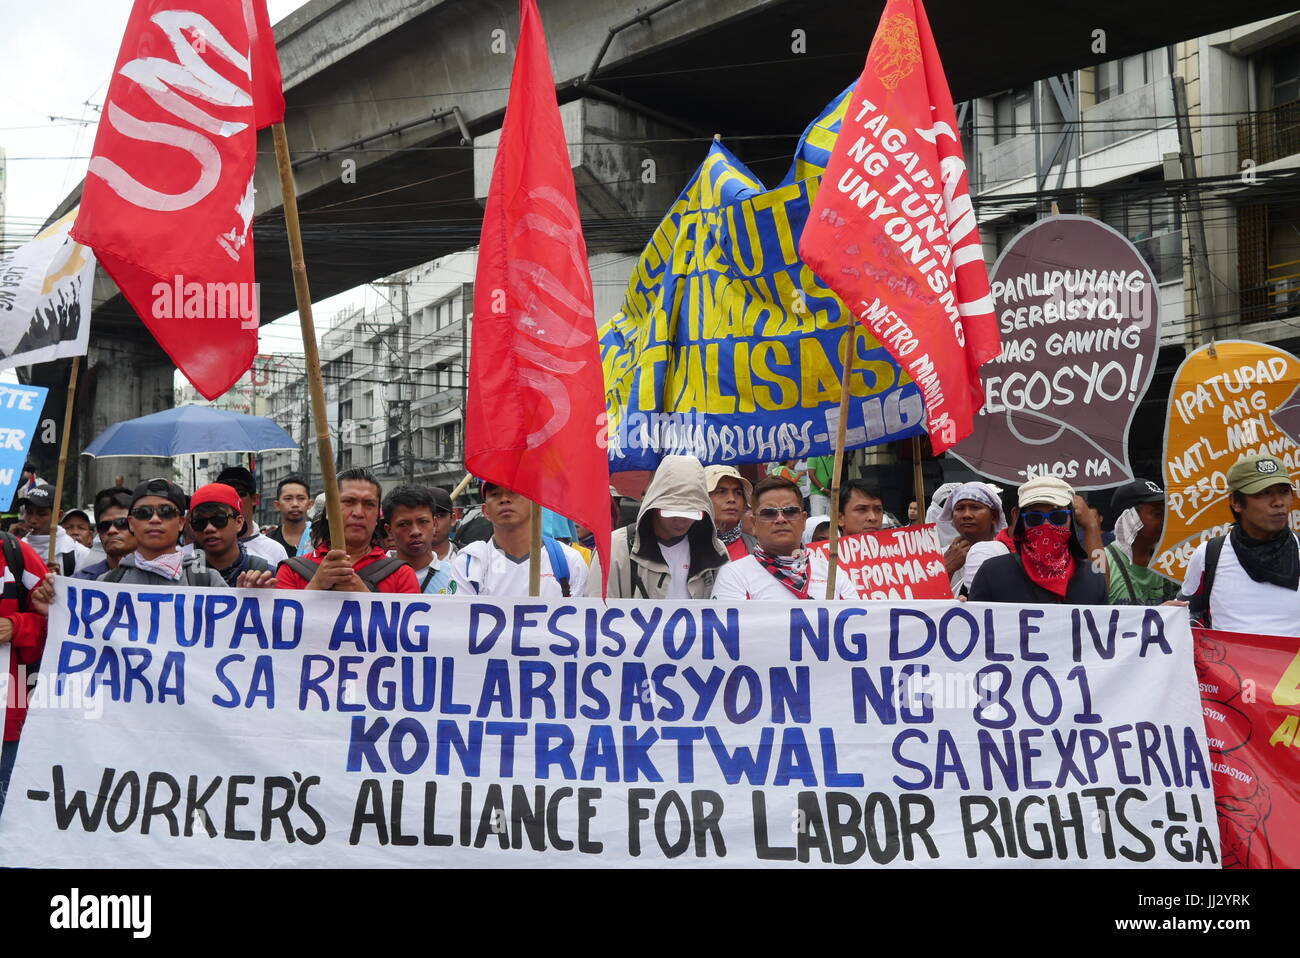 Shouting out regularization of workers. Protest against jeepney phase out led by the PISTON and joined by workers who is against 'Endo', end of contrast. Stock Photo